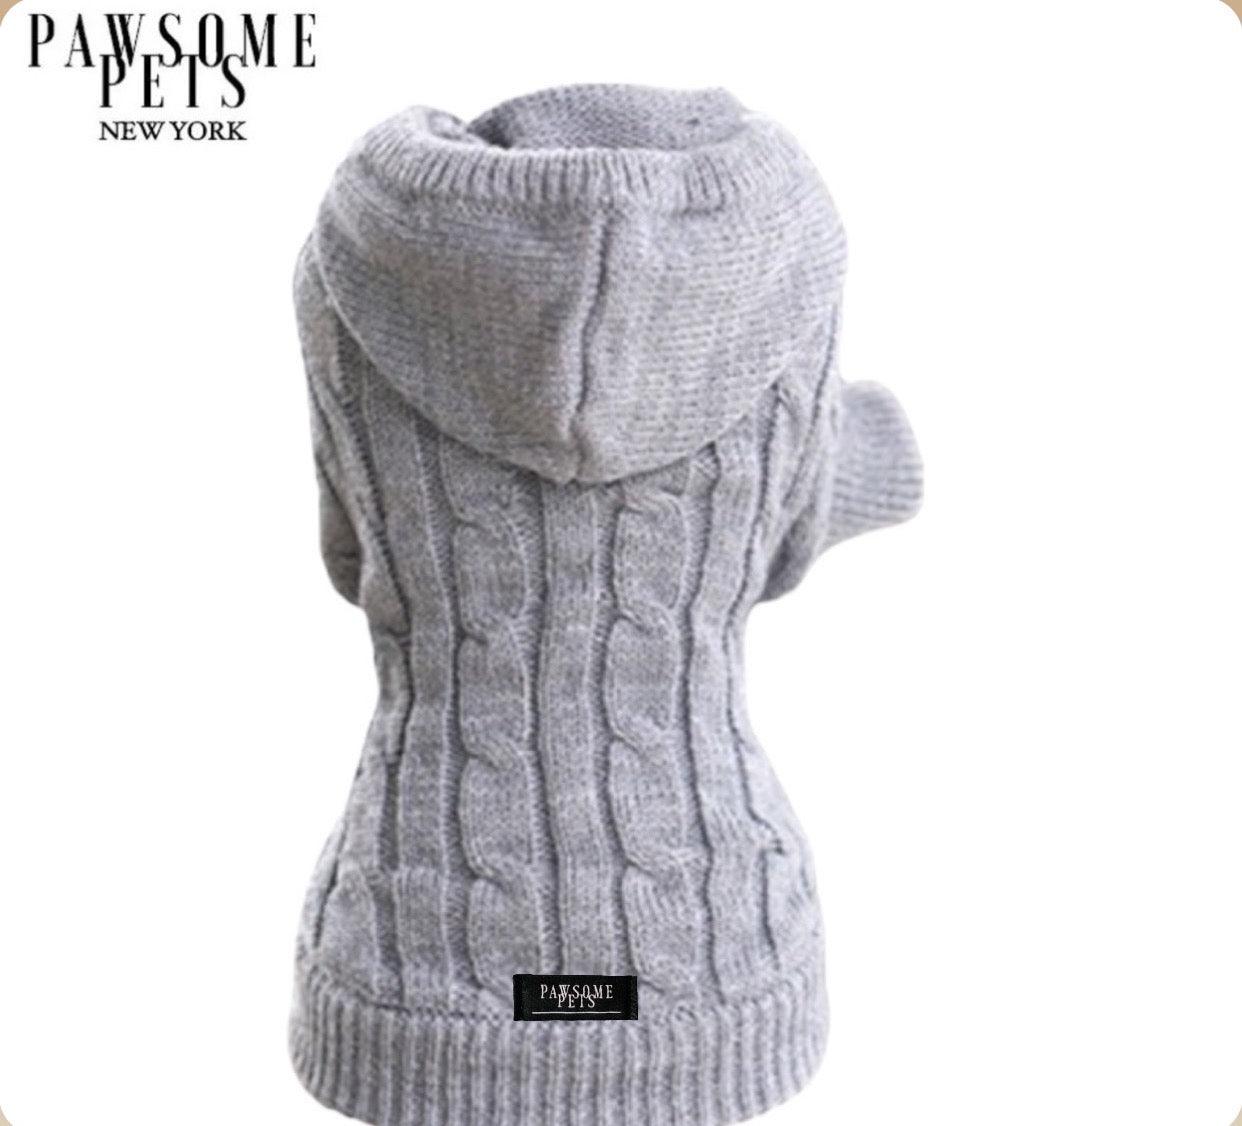 (EXTRA WARM) DOG AND CAT CABLE KNIT SWEATER WITH HAT - GREY - Pawsomepetsnewyork